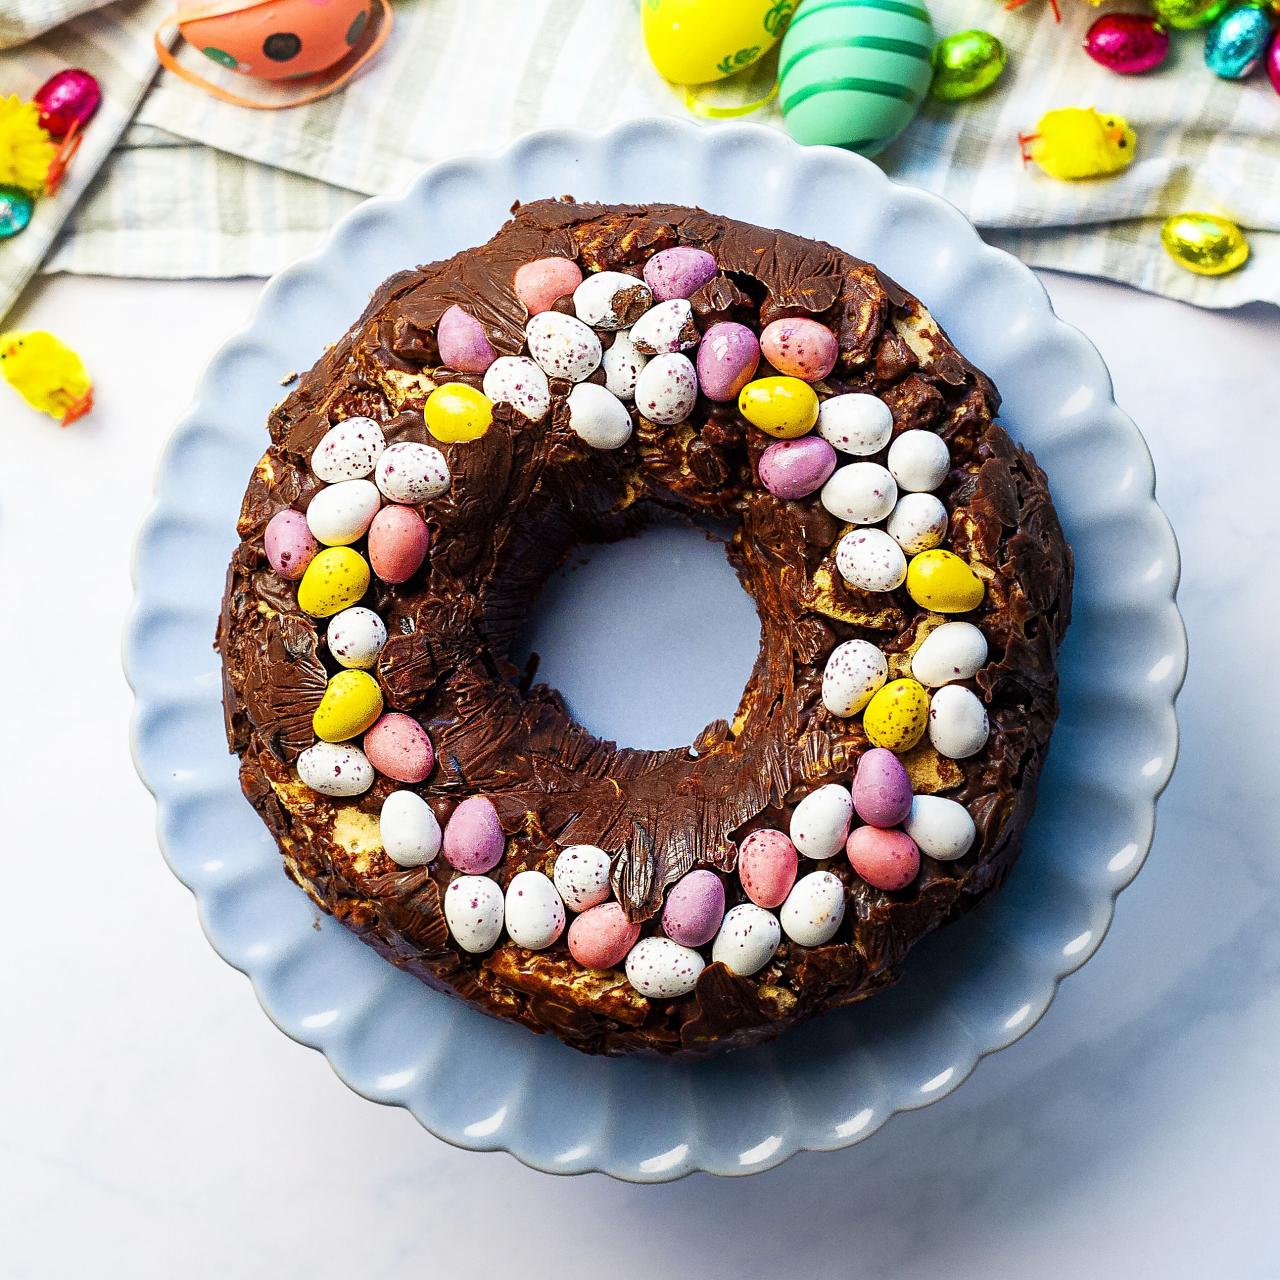 Here are our best ever chocolate cake recipes for Easter 2023